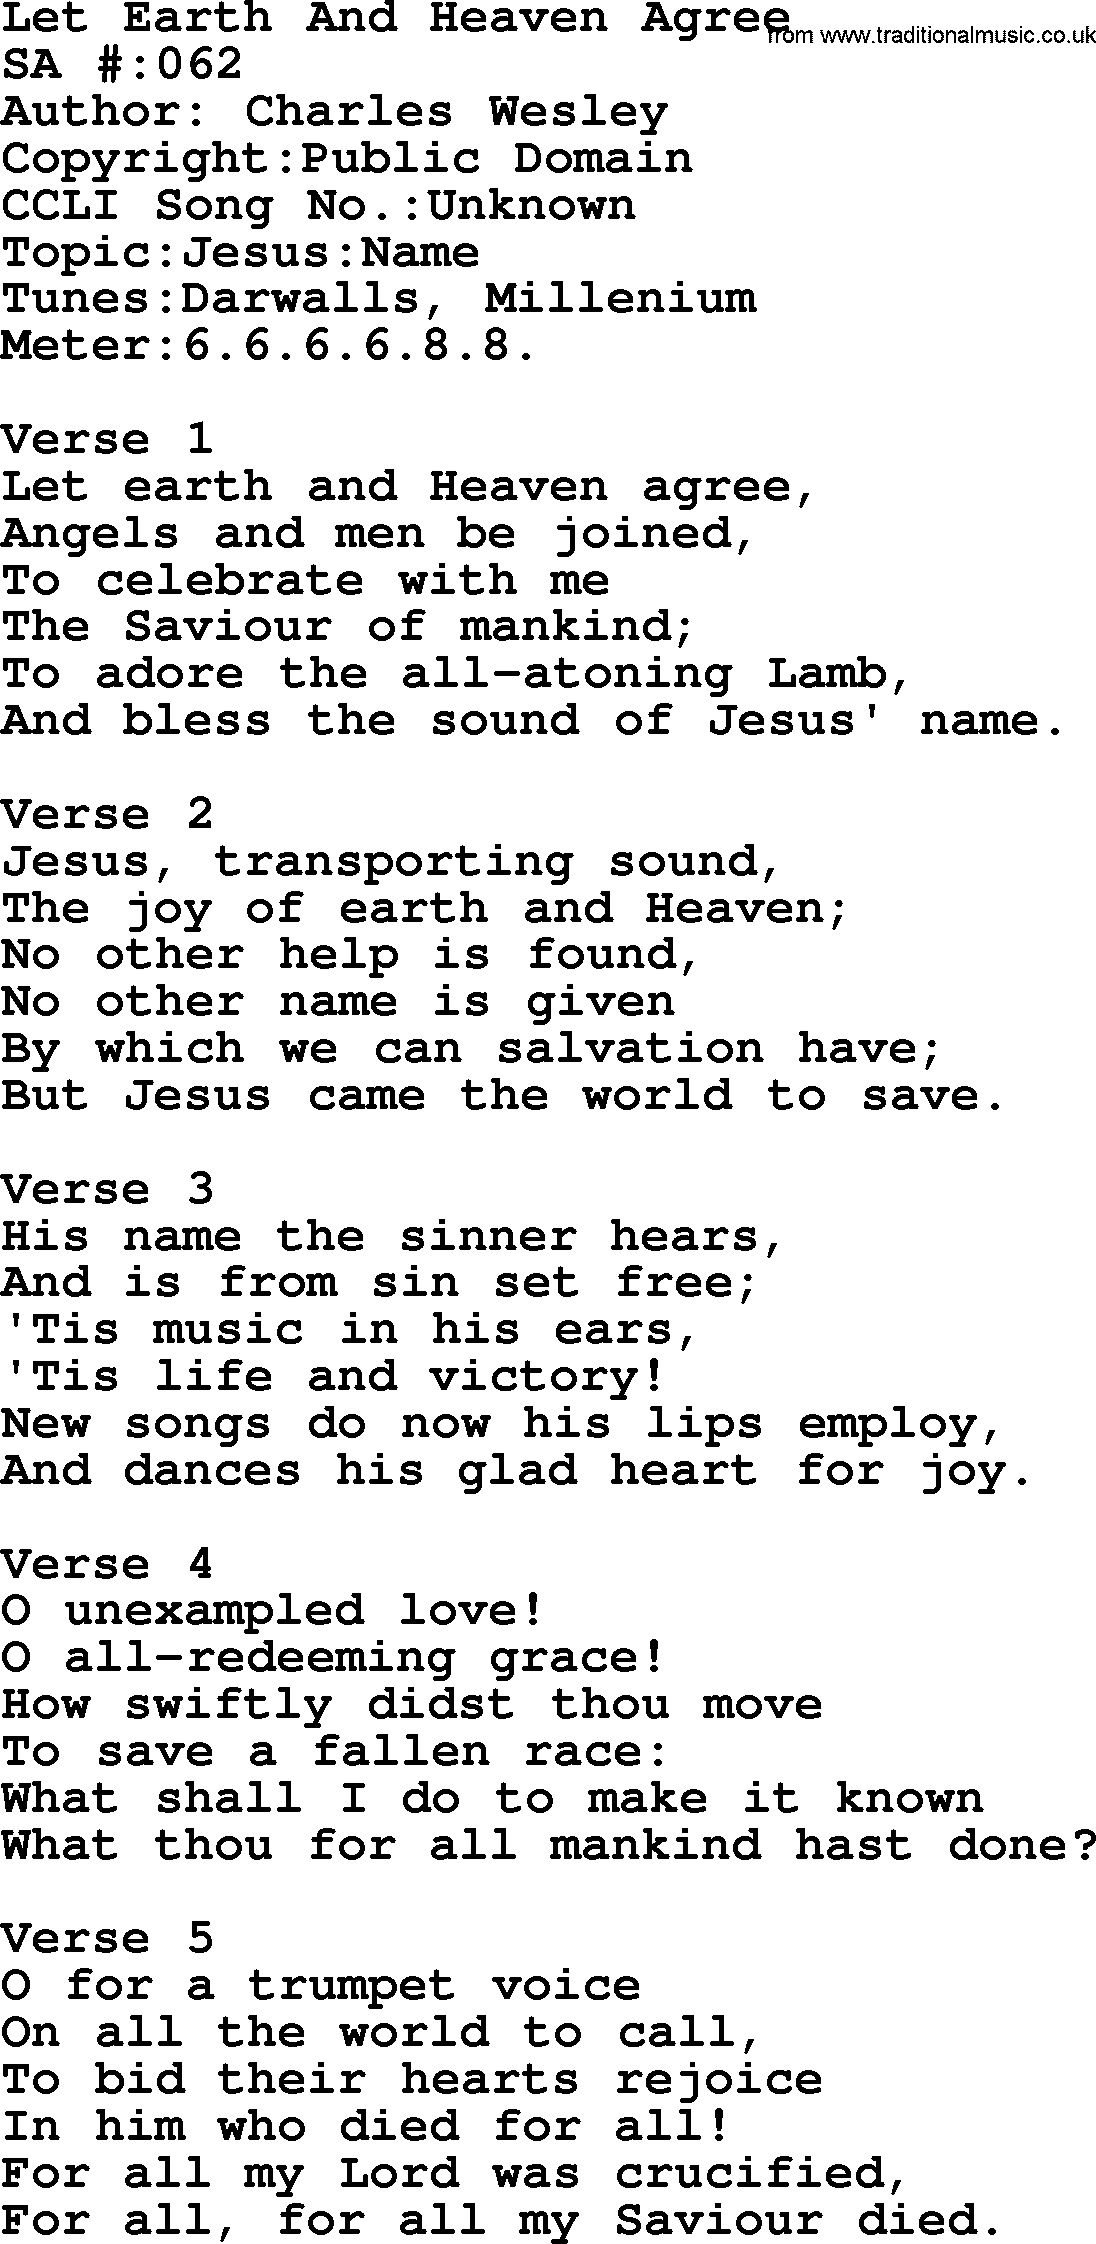 Salvation Army Hymnal, title: Let Earth And Heaven Agree, with lyrics and PDF,